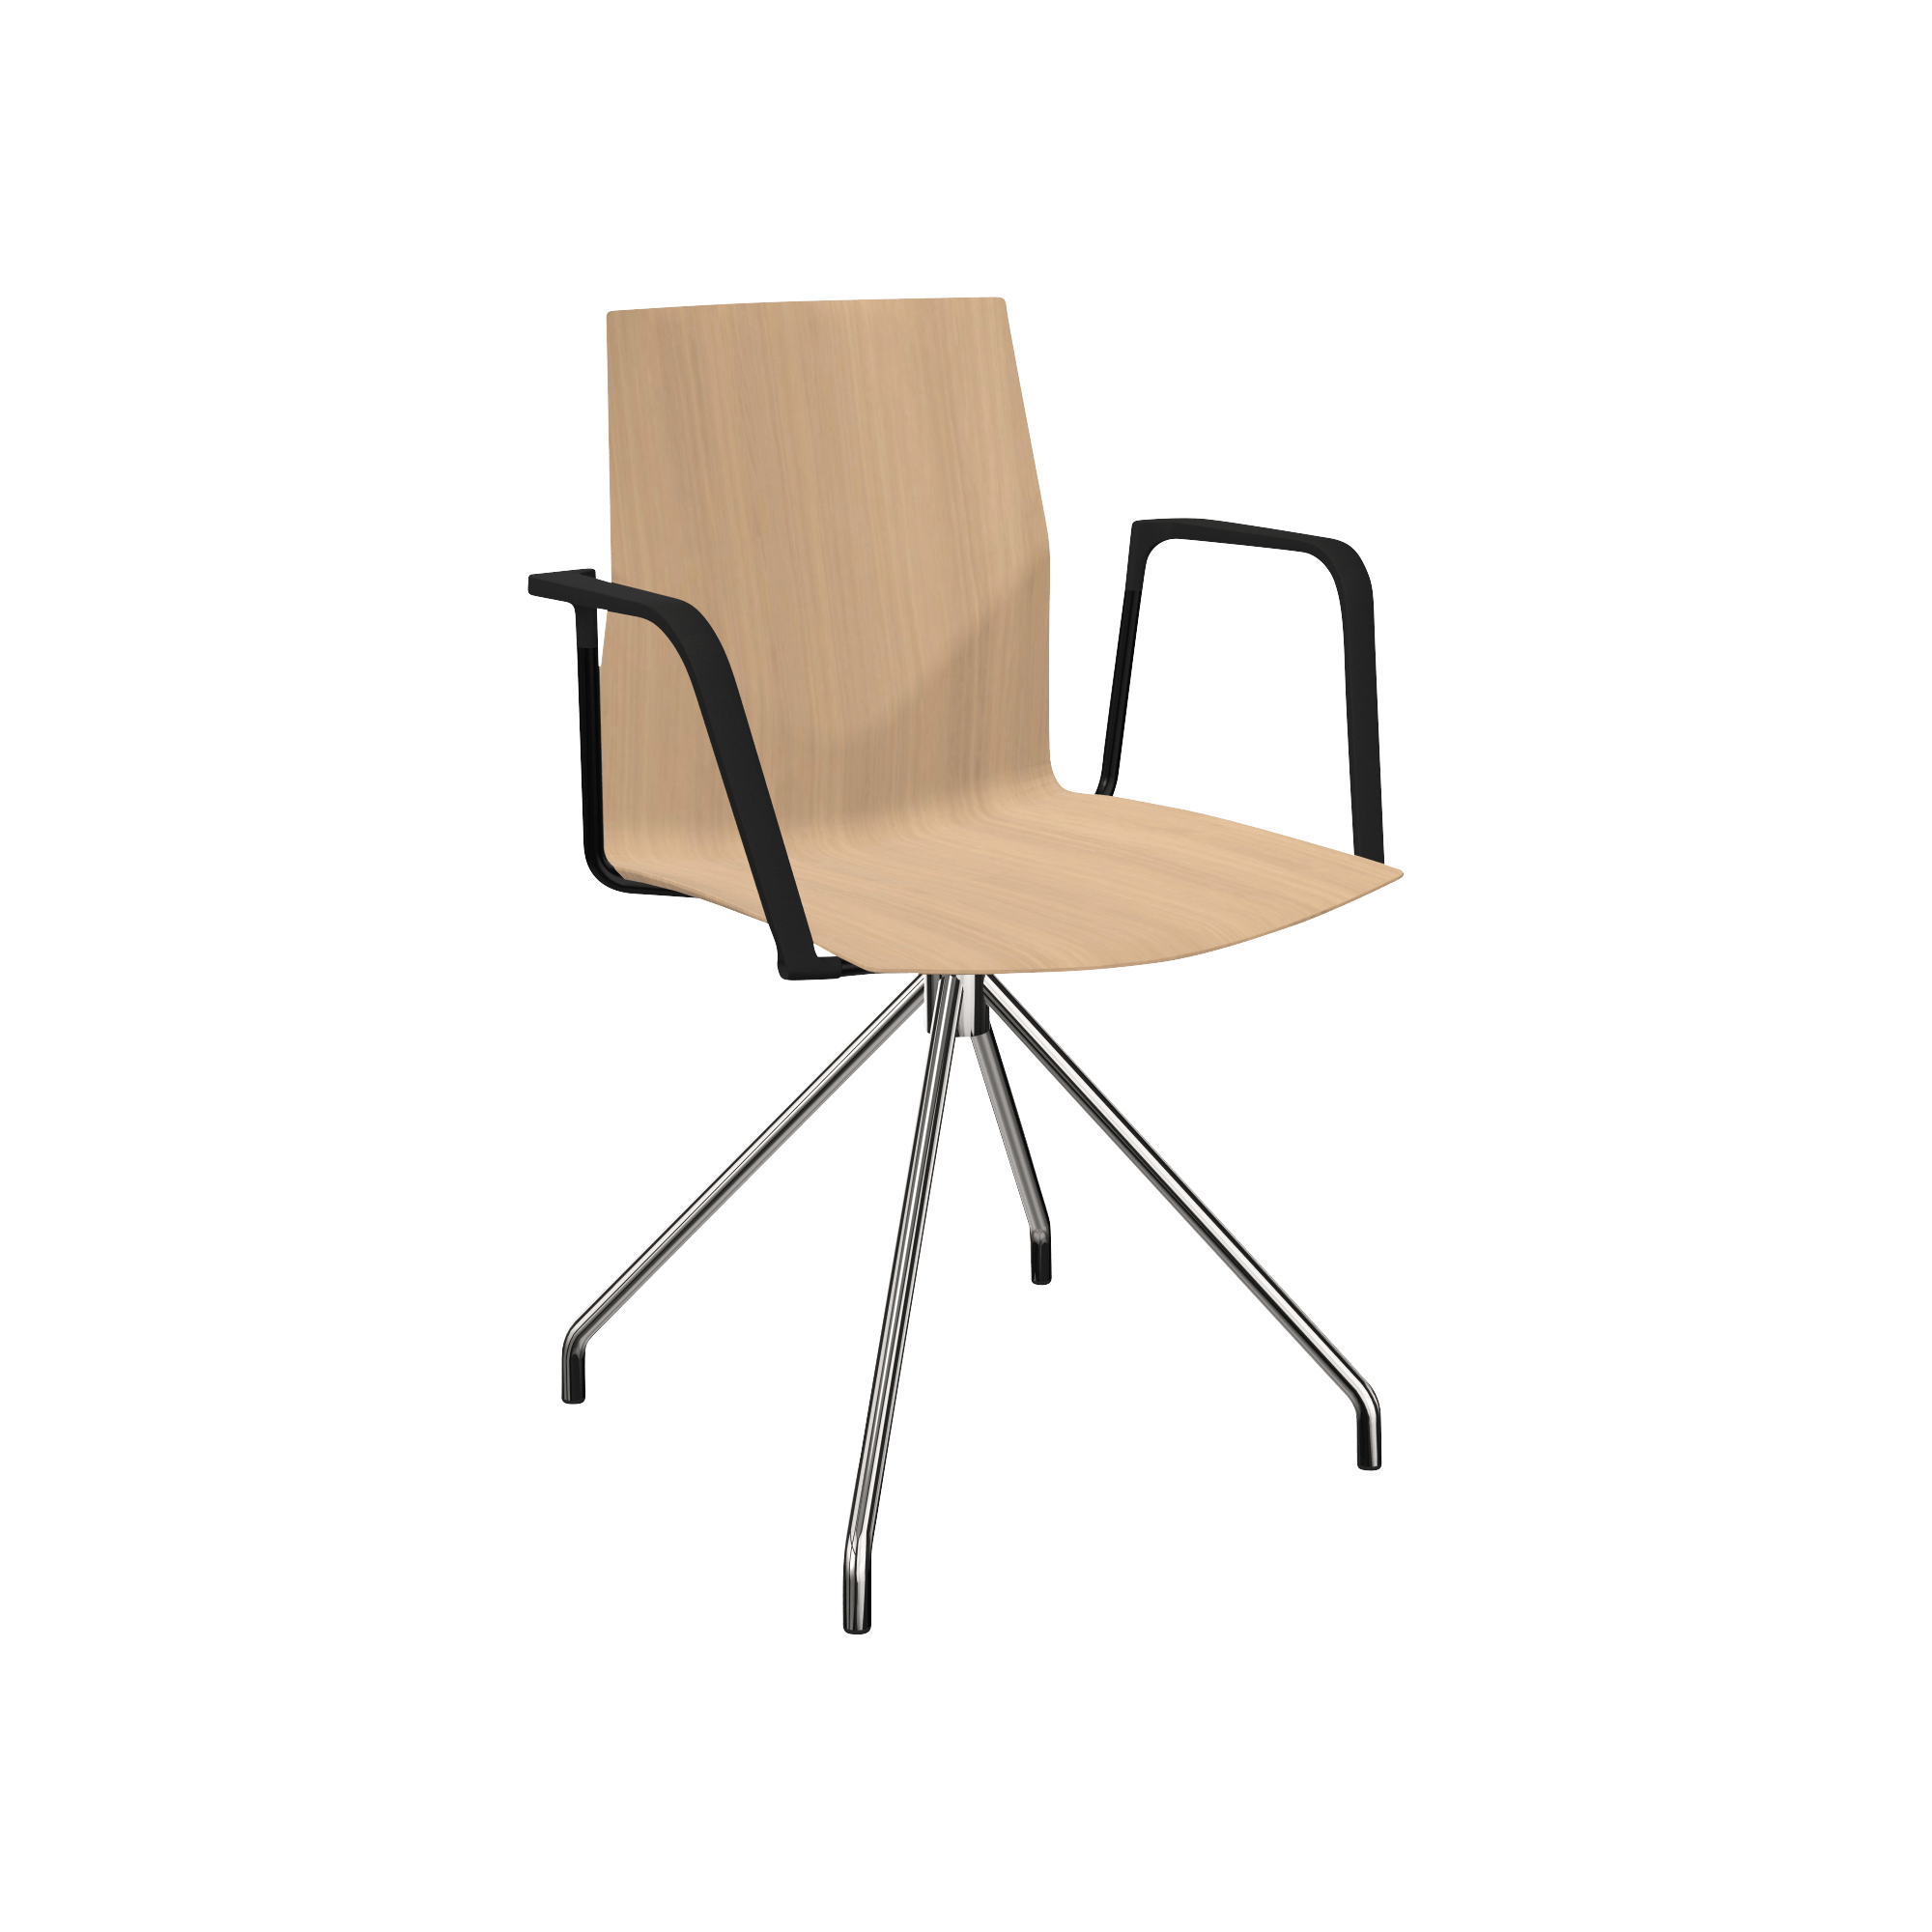 A wooden chair with metal legs.